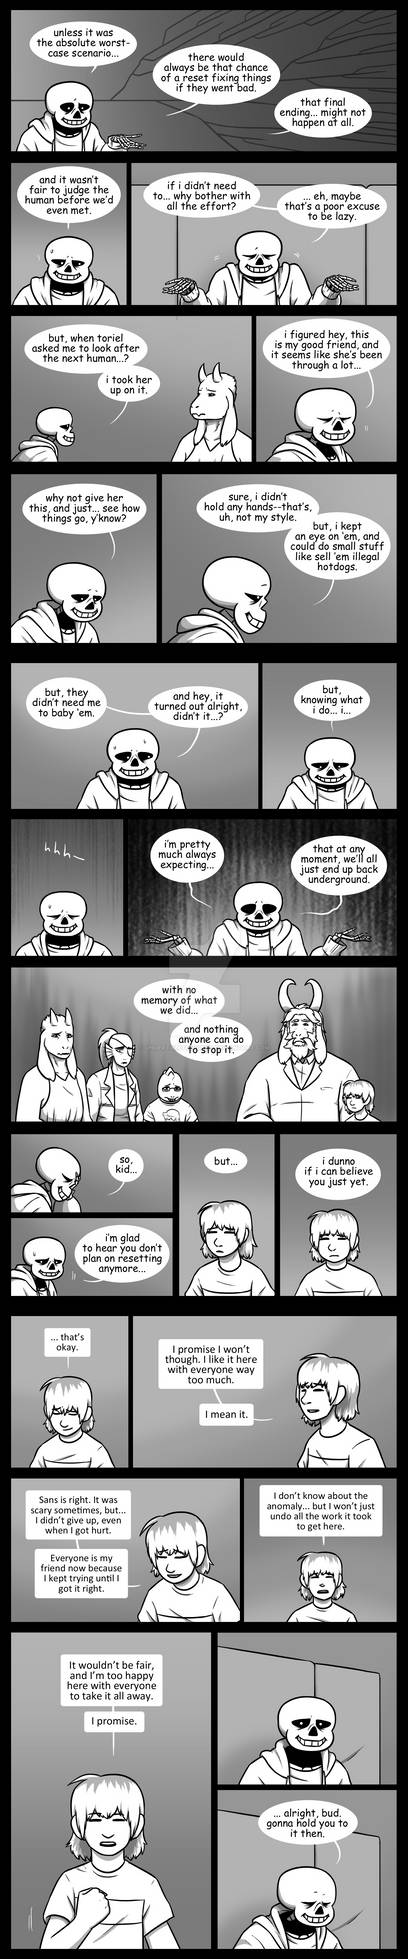 Unexpected Guests: Chapter 7, Part 32 by UndertaleThingems on DeviantArt